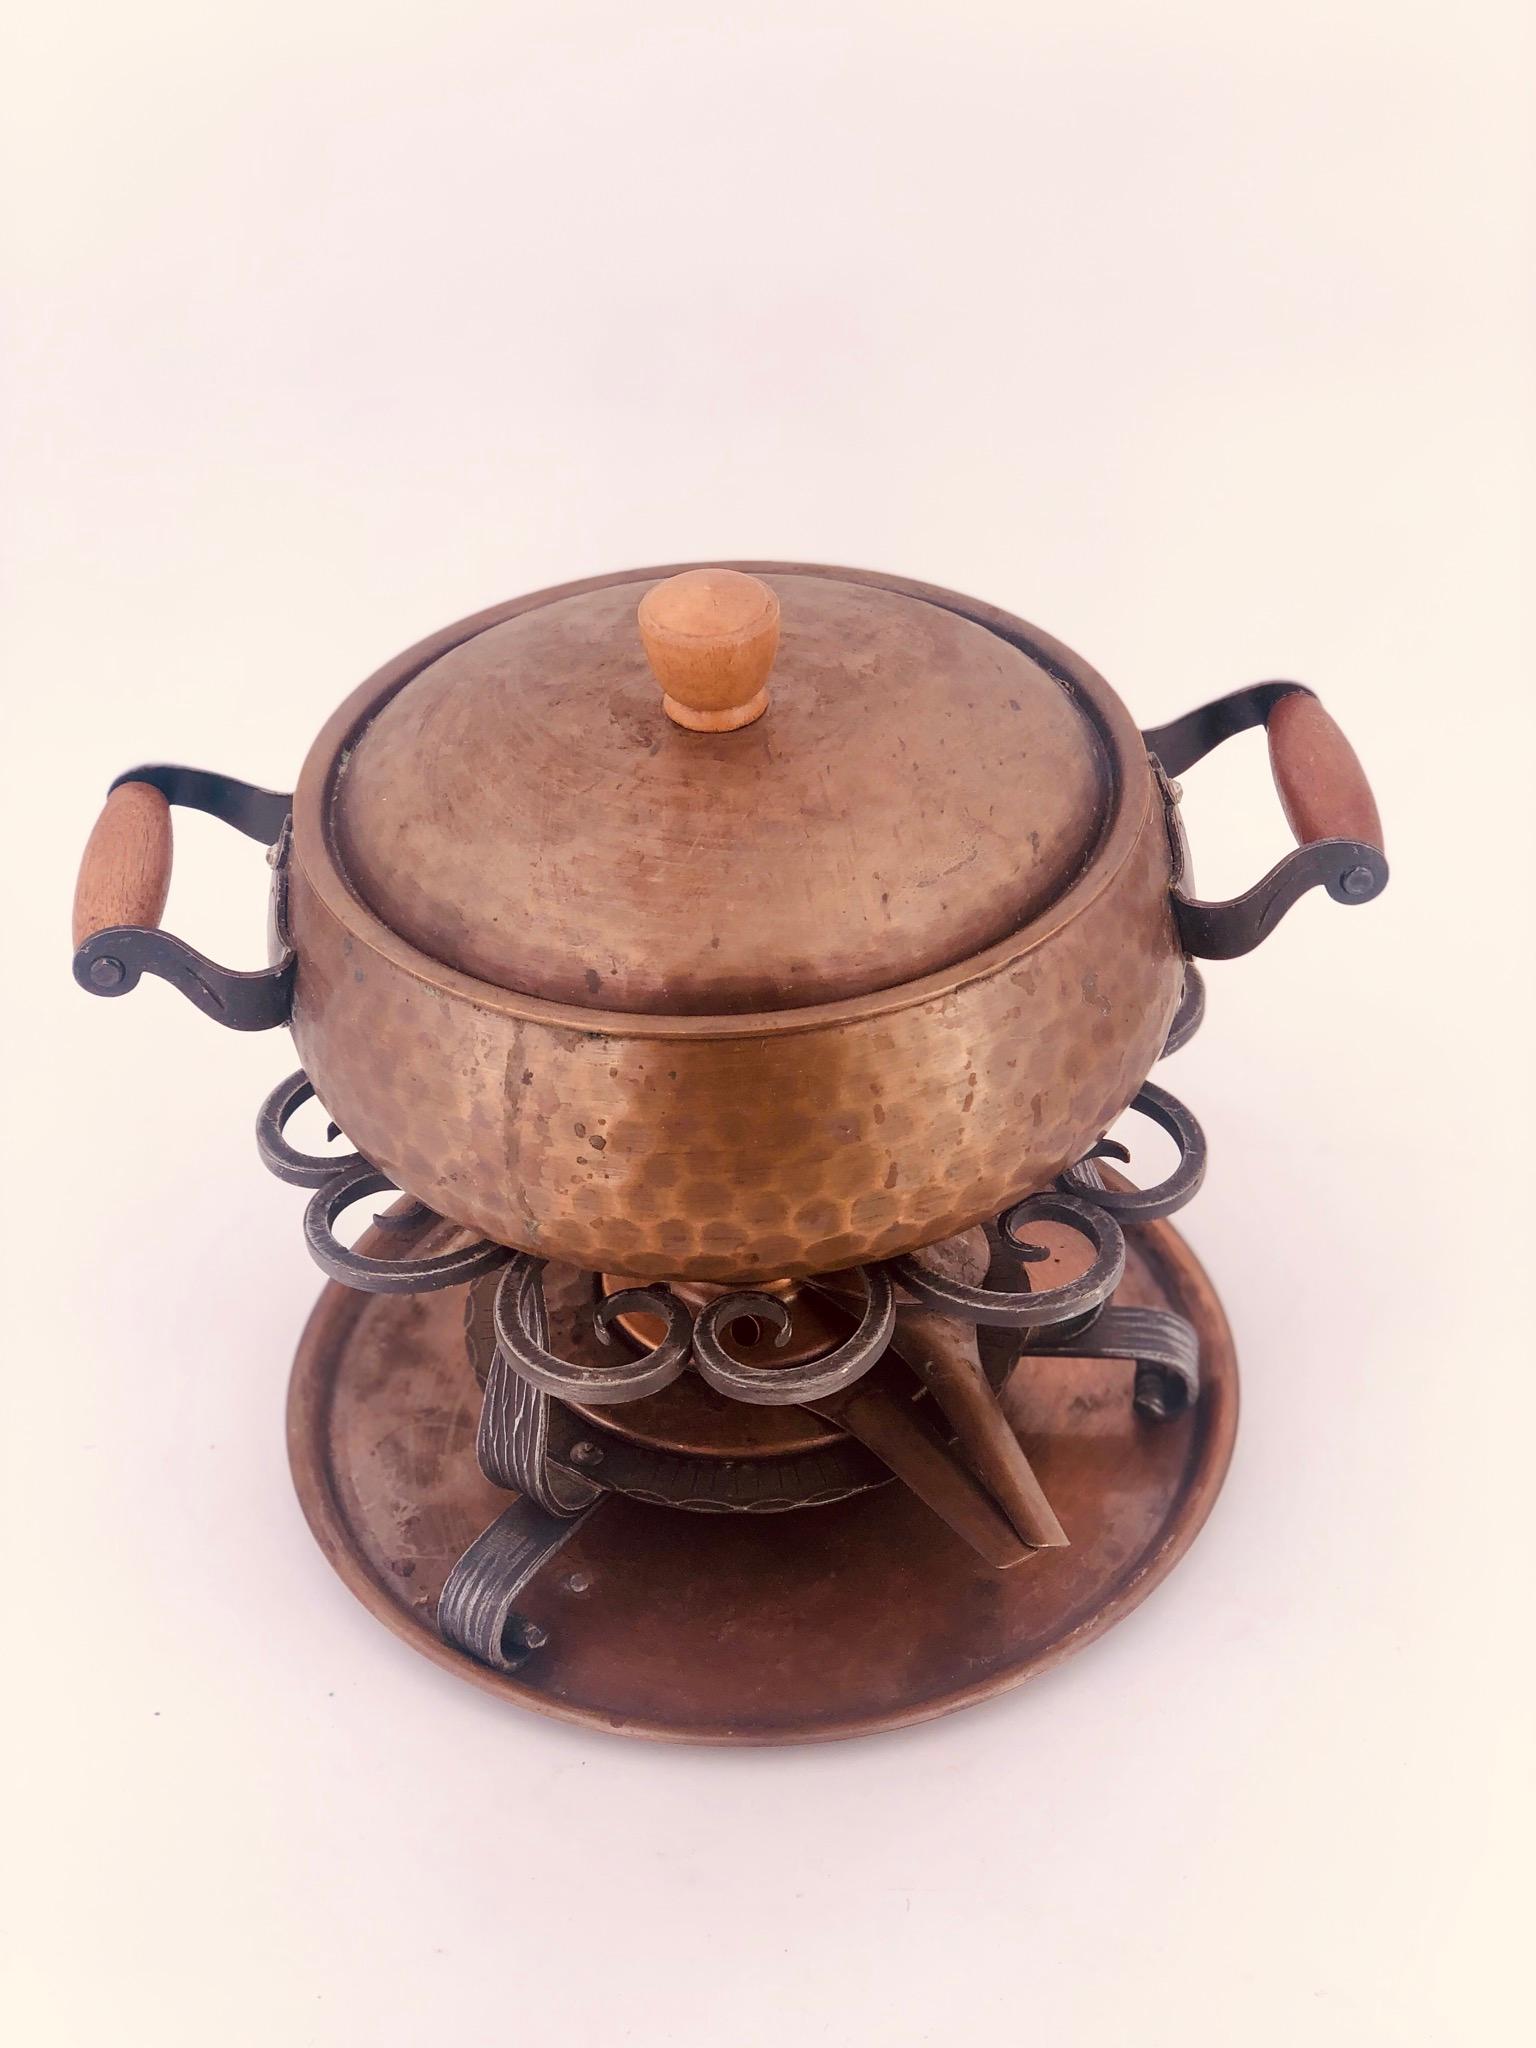 Antique copper hammered Fondue Casserole & Burnner by Stockli Netstal Switzerland, circa 1970s condition it's lightly used, comes with original boxes and manuals.